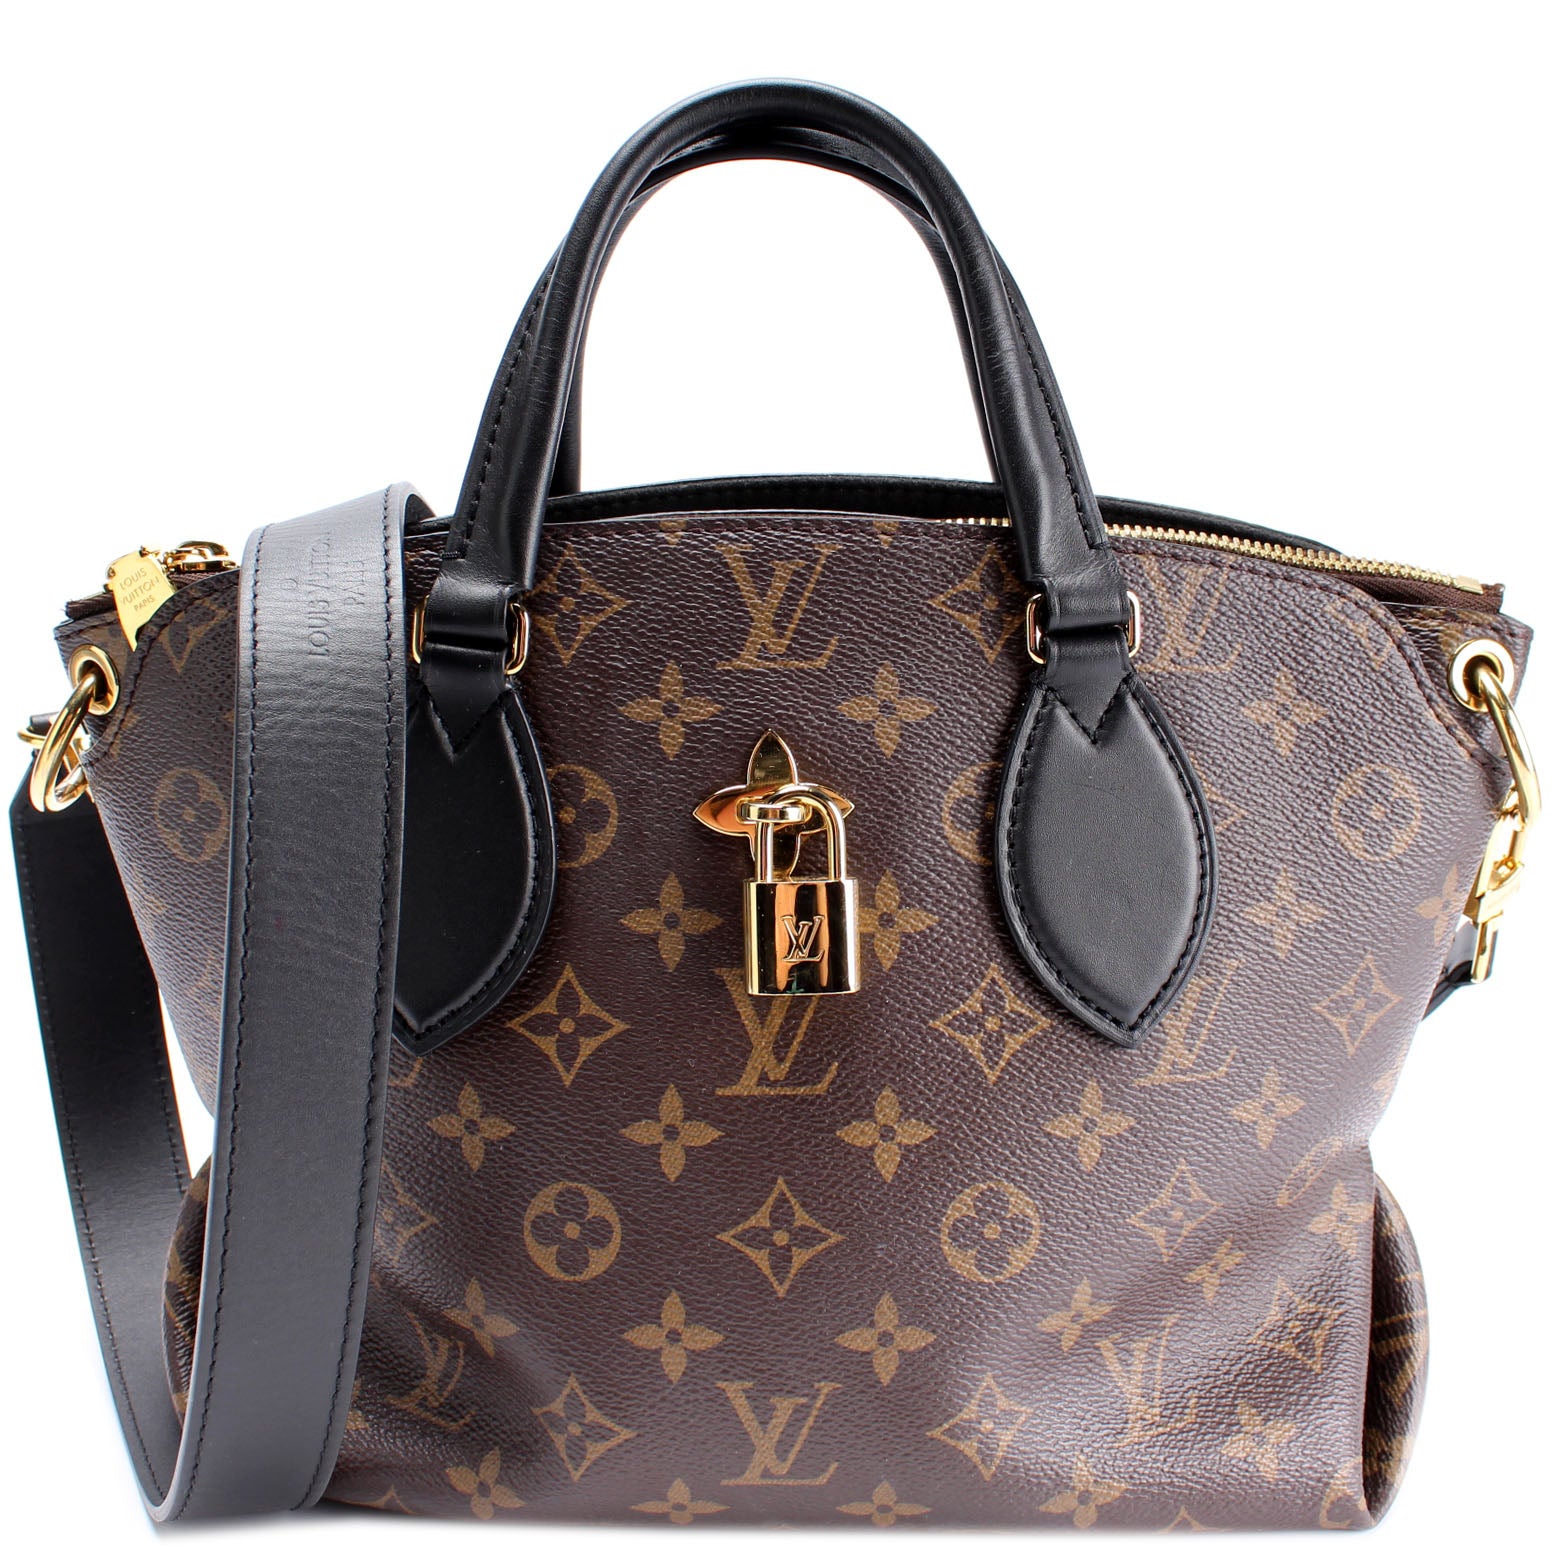 LOUIS VUITTON 2019 Pre-owned Monogram Flower-zipped Pm Tote Bag